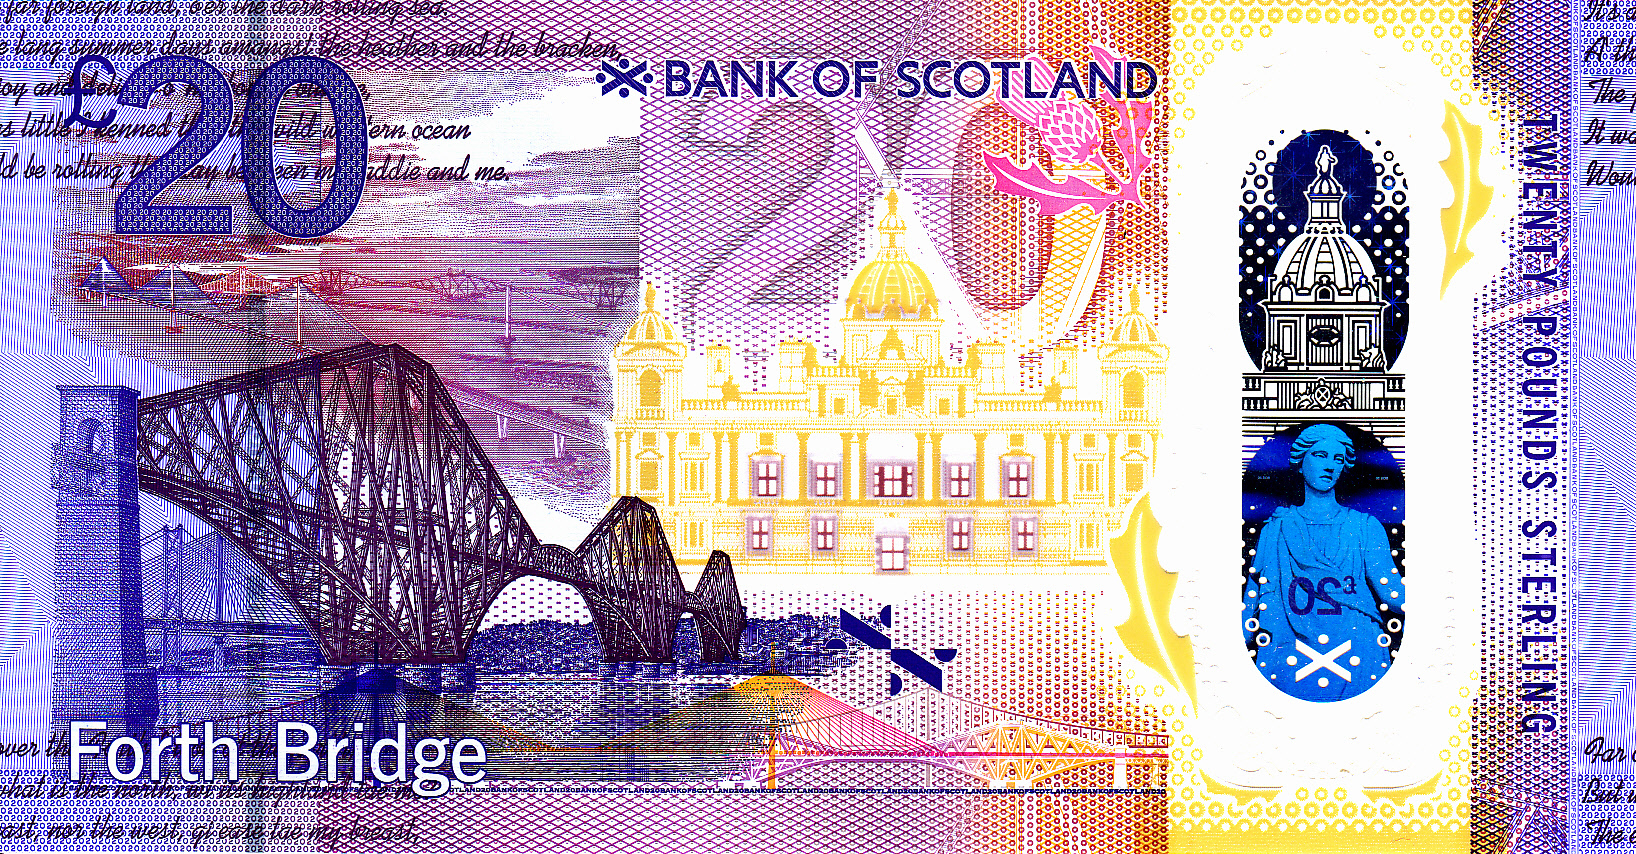 Scotland’s Bank of Scotland new 20pound polymer note confirmed